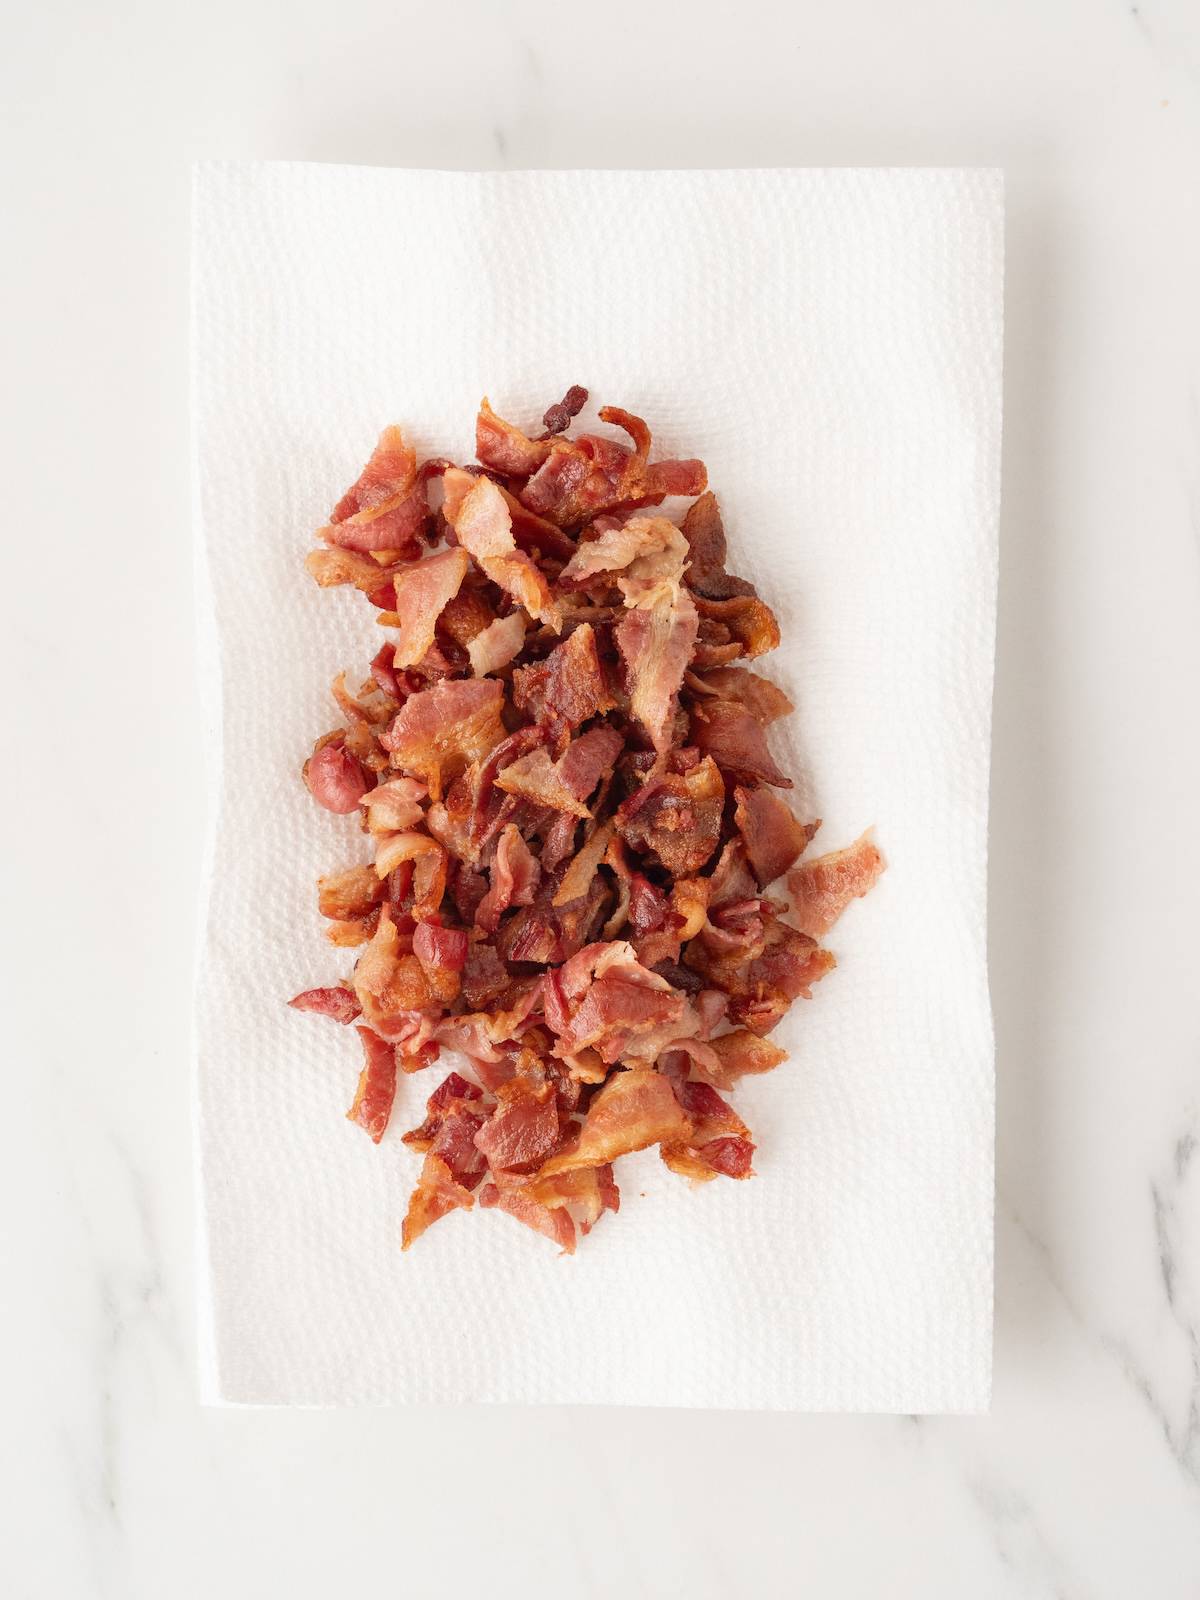 A paper towel-lined plate with cooked bacon.